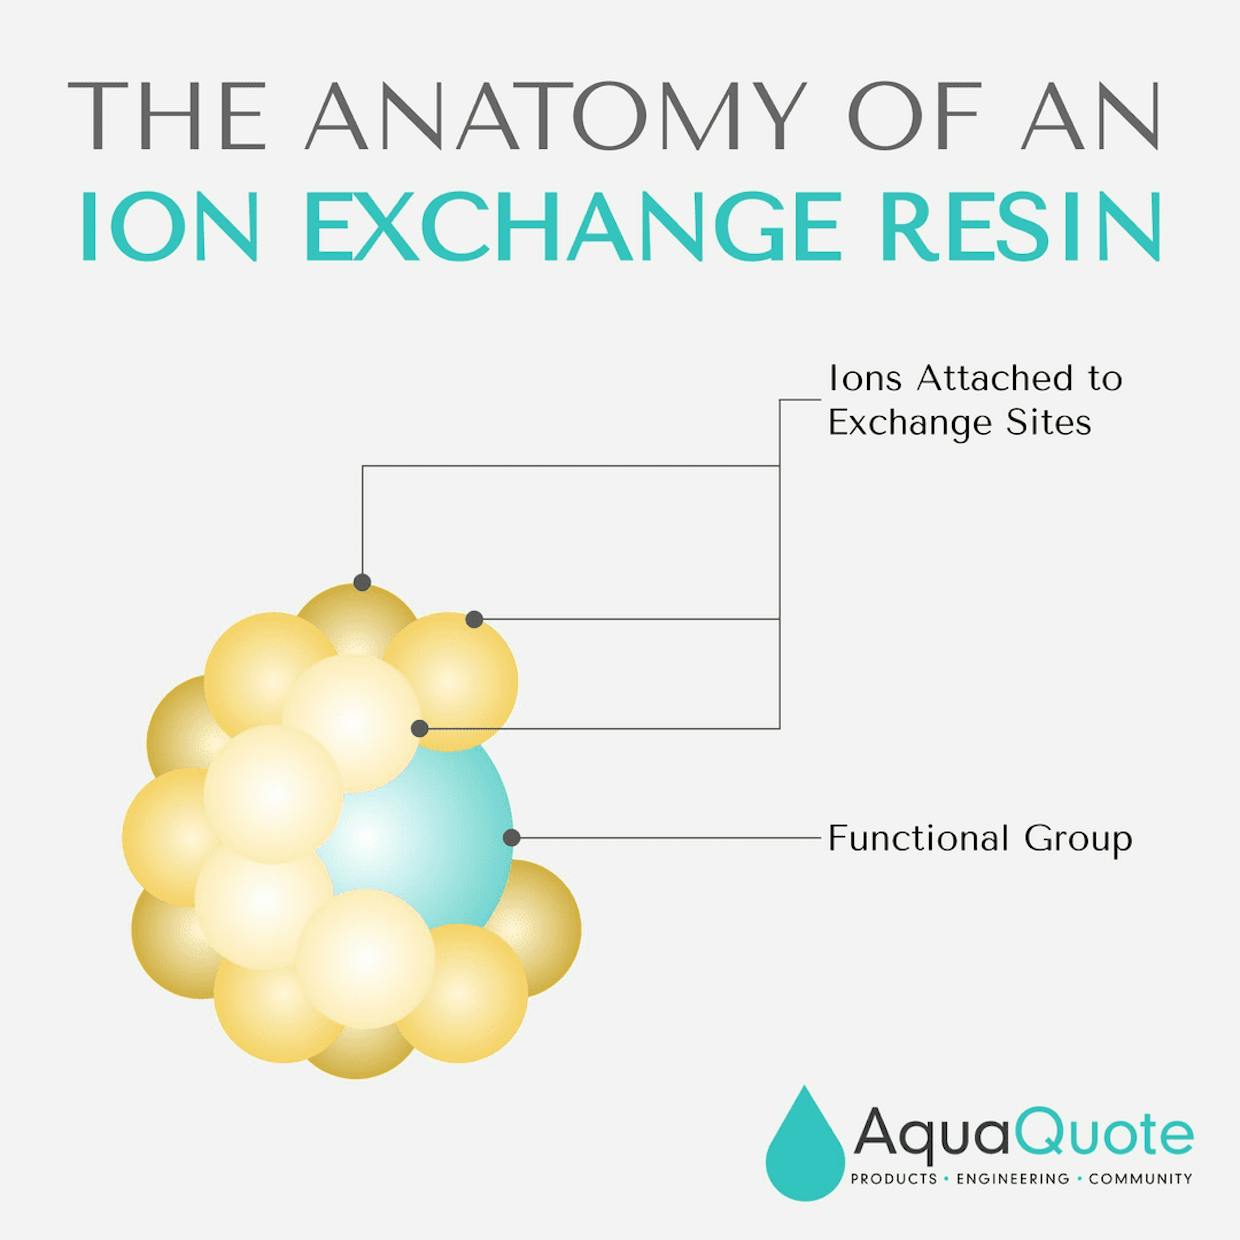 Ions attach to functional sites on an ion exchange resin bead